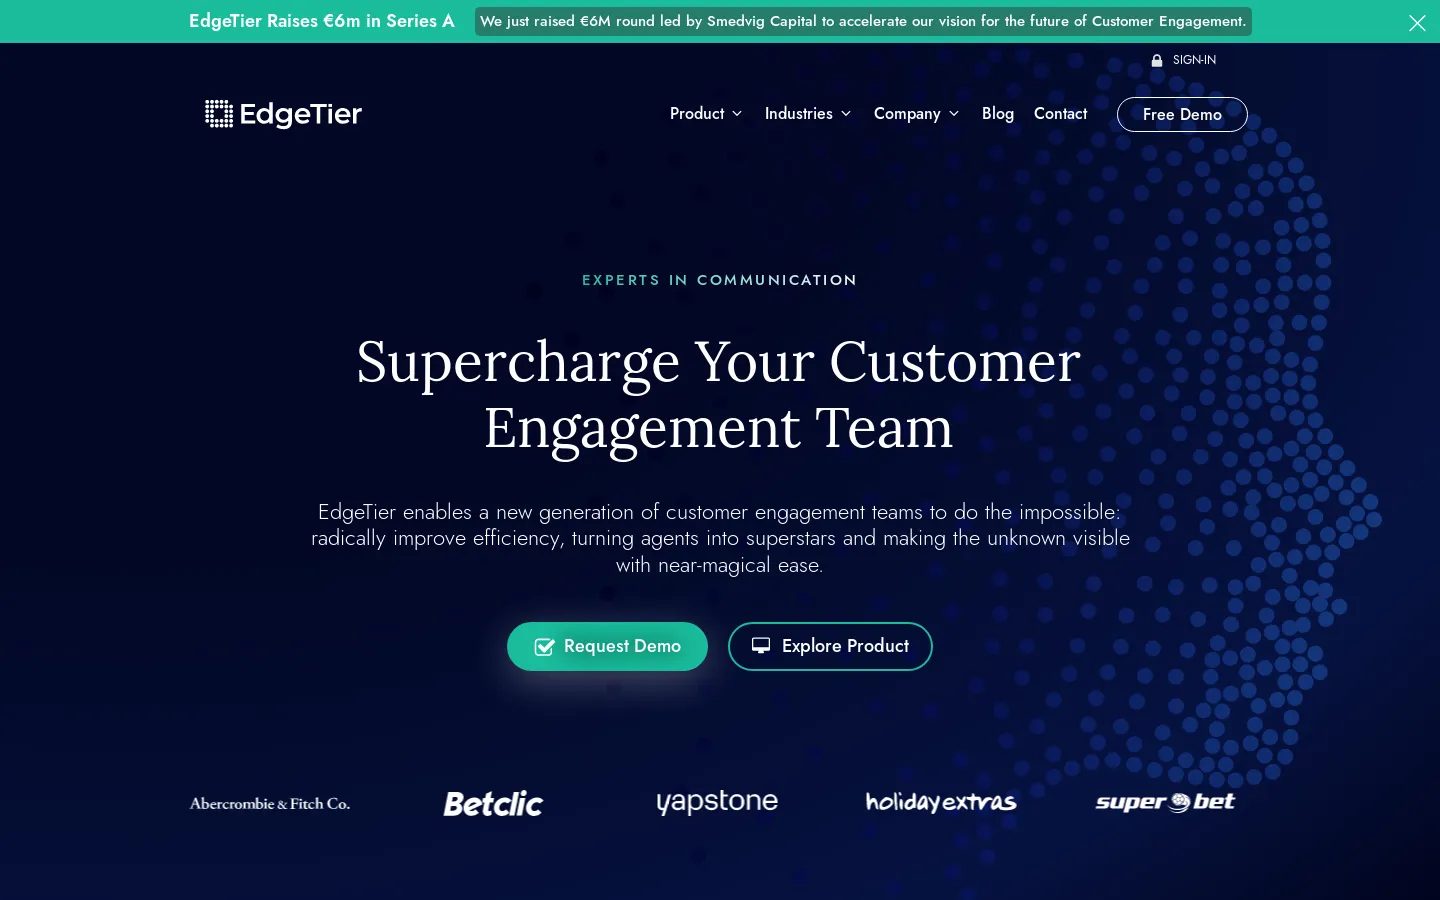 Better Customer Experience Starts With EdgeTier AI Software